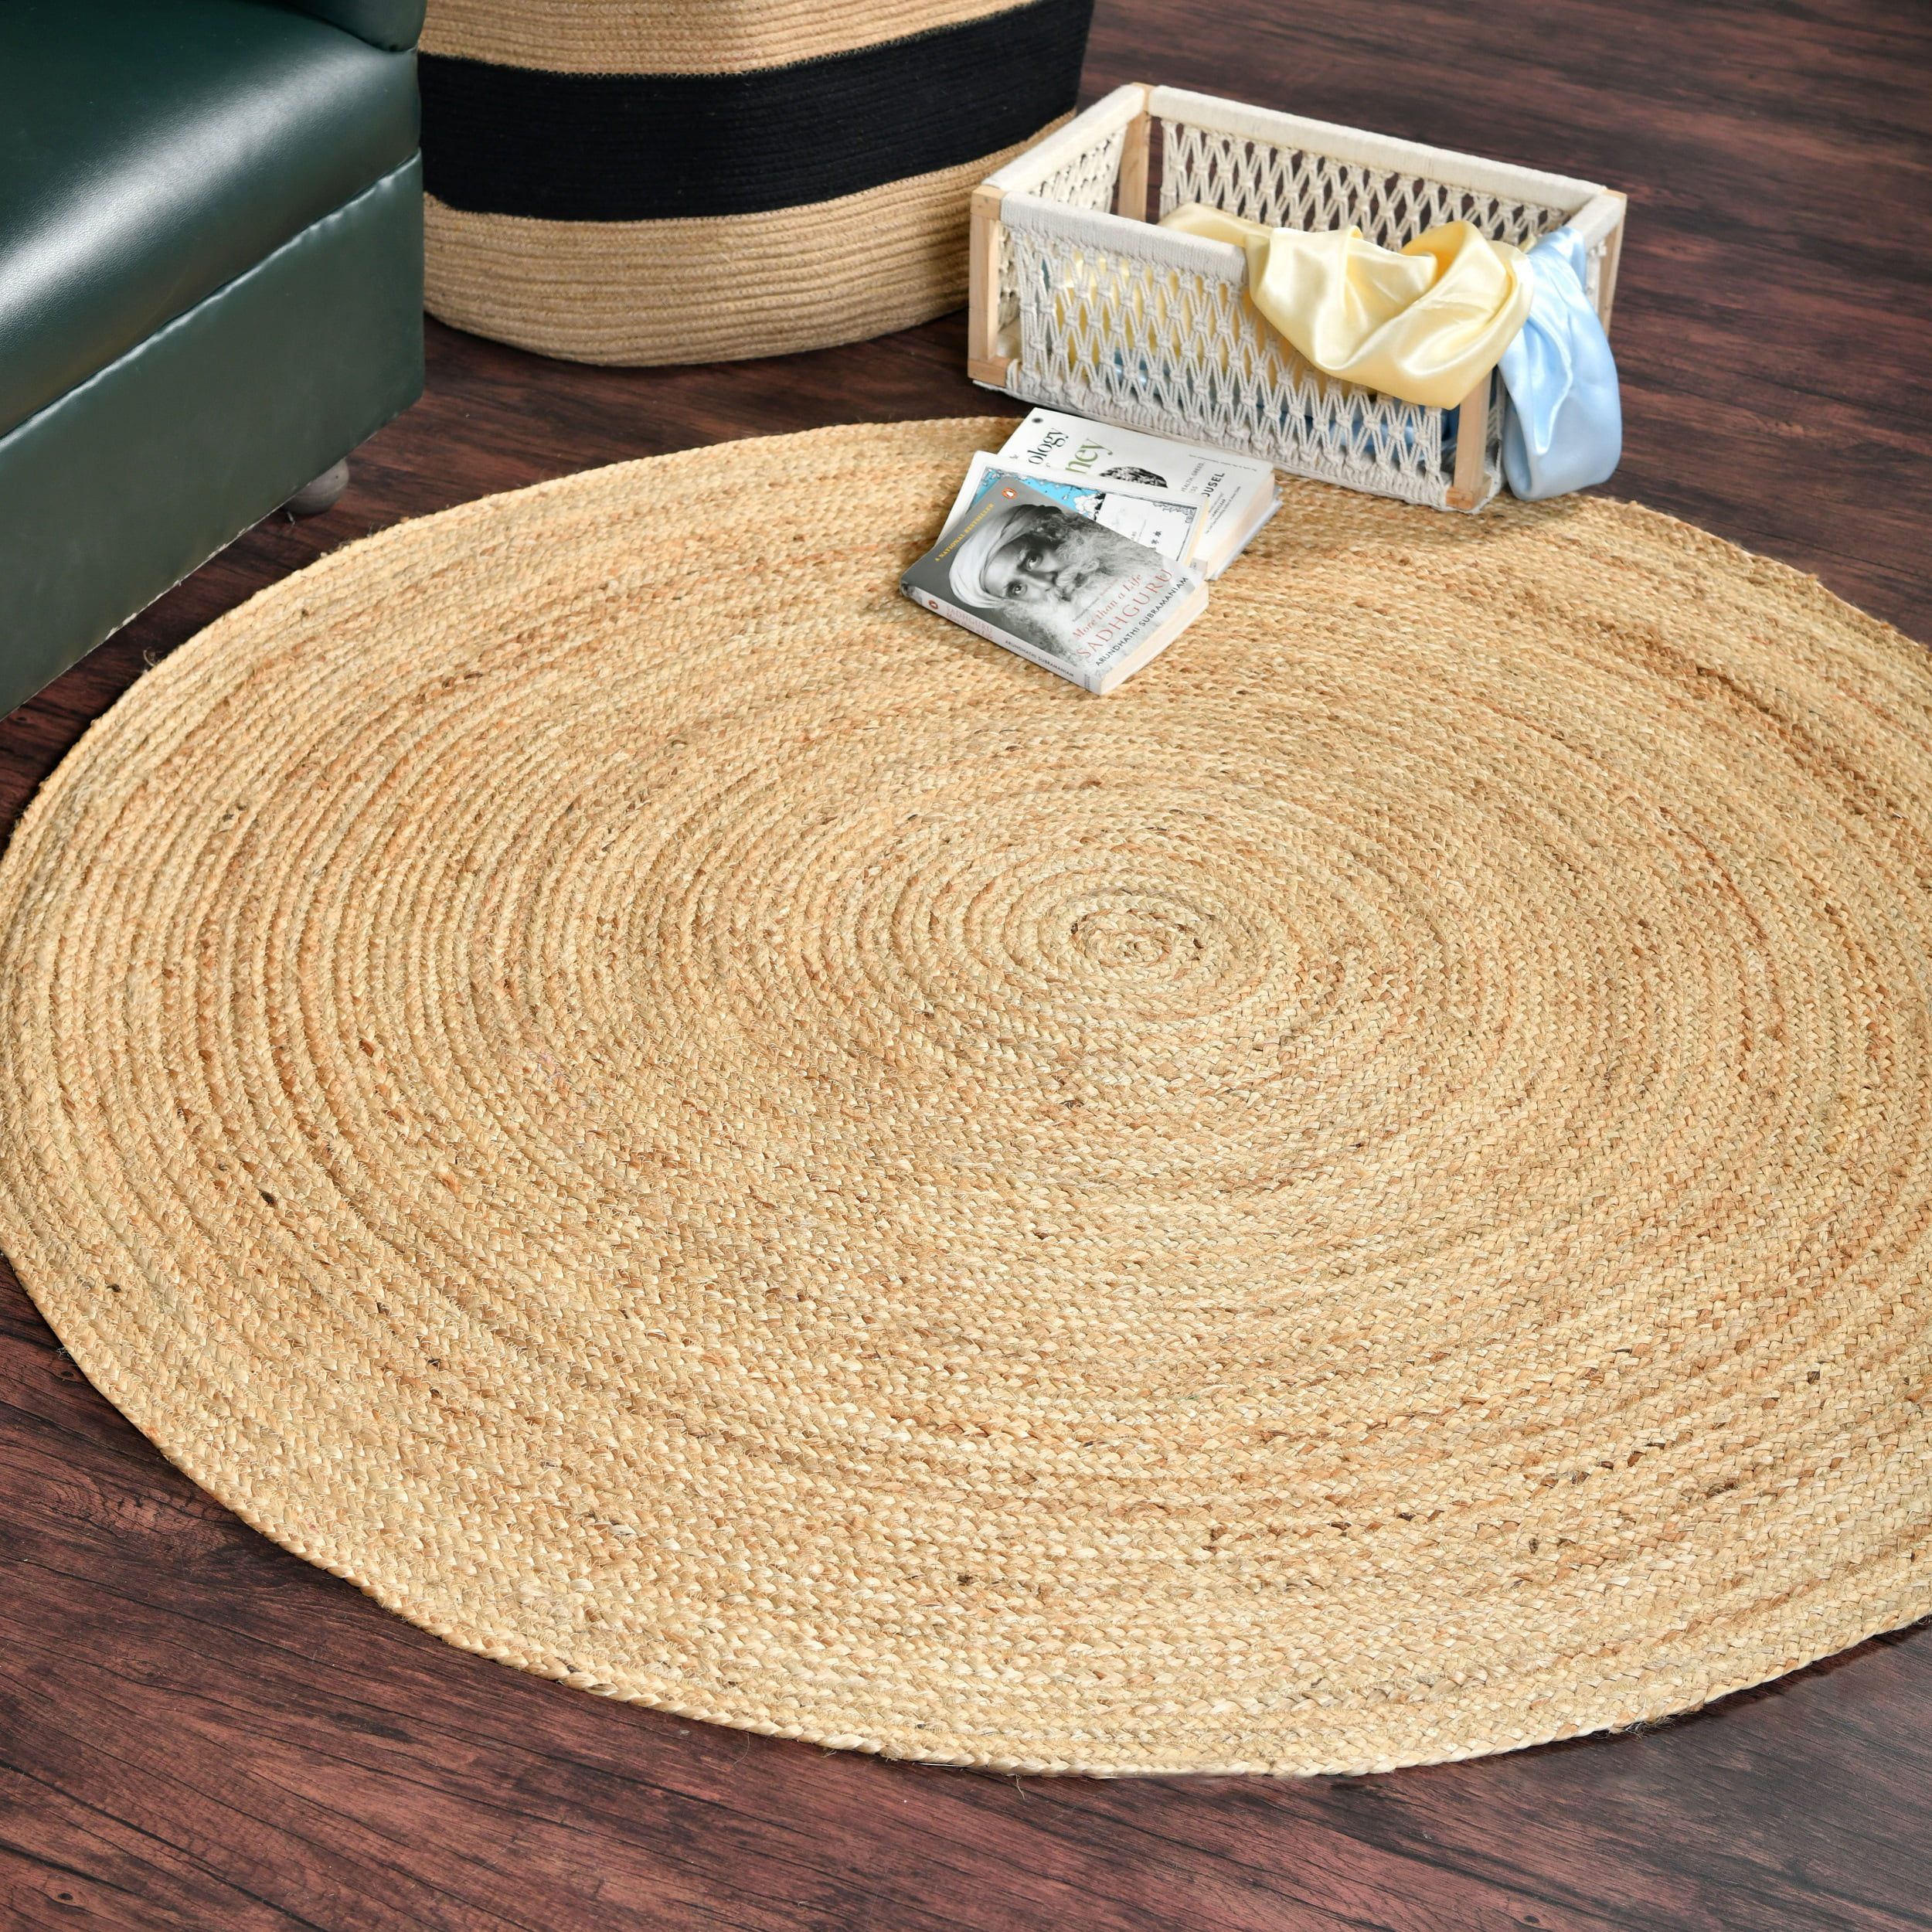 Homemonde Hand Woven Braided Jute Area Rug 6 Ft Round Natural Reversible  Rugs For Kitchen Living Room Entryway – Walmart For Hand Woven Braided Rugs (View 2 of 15)